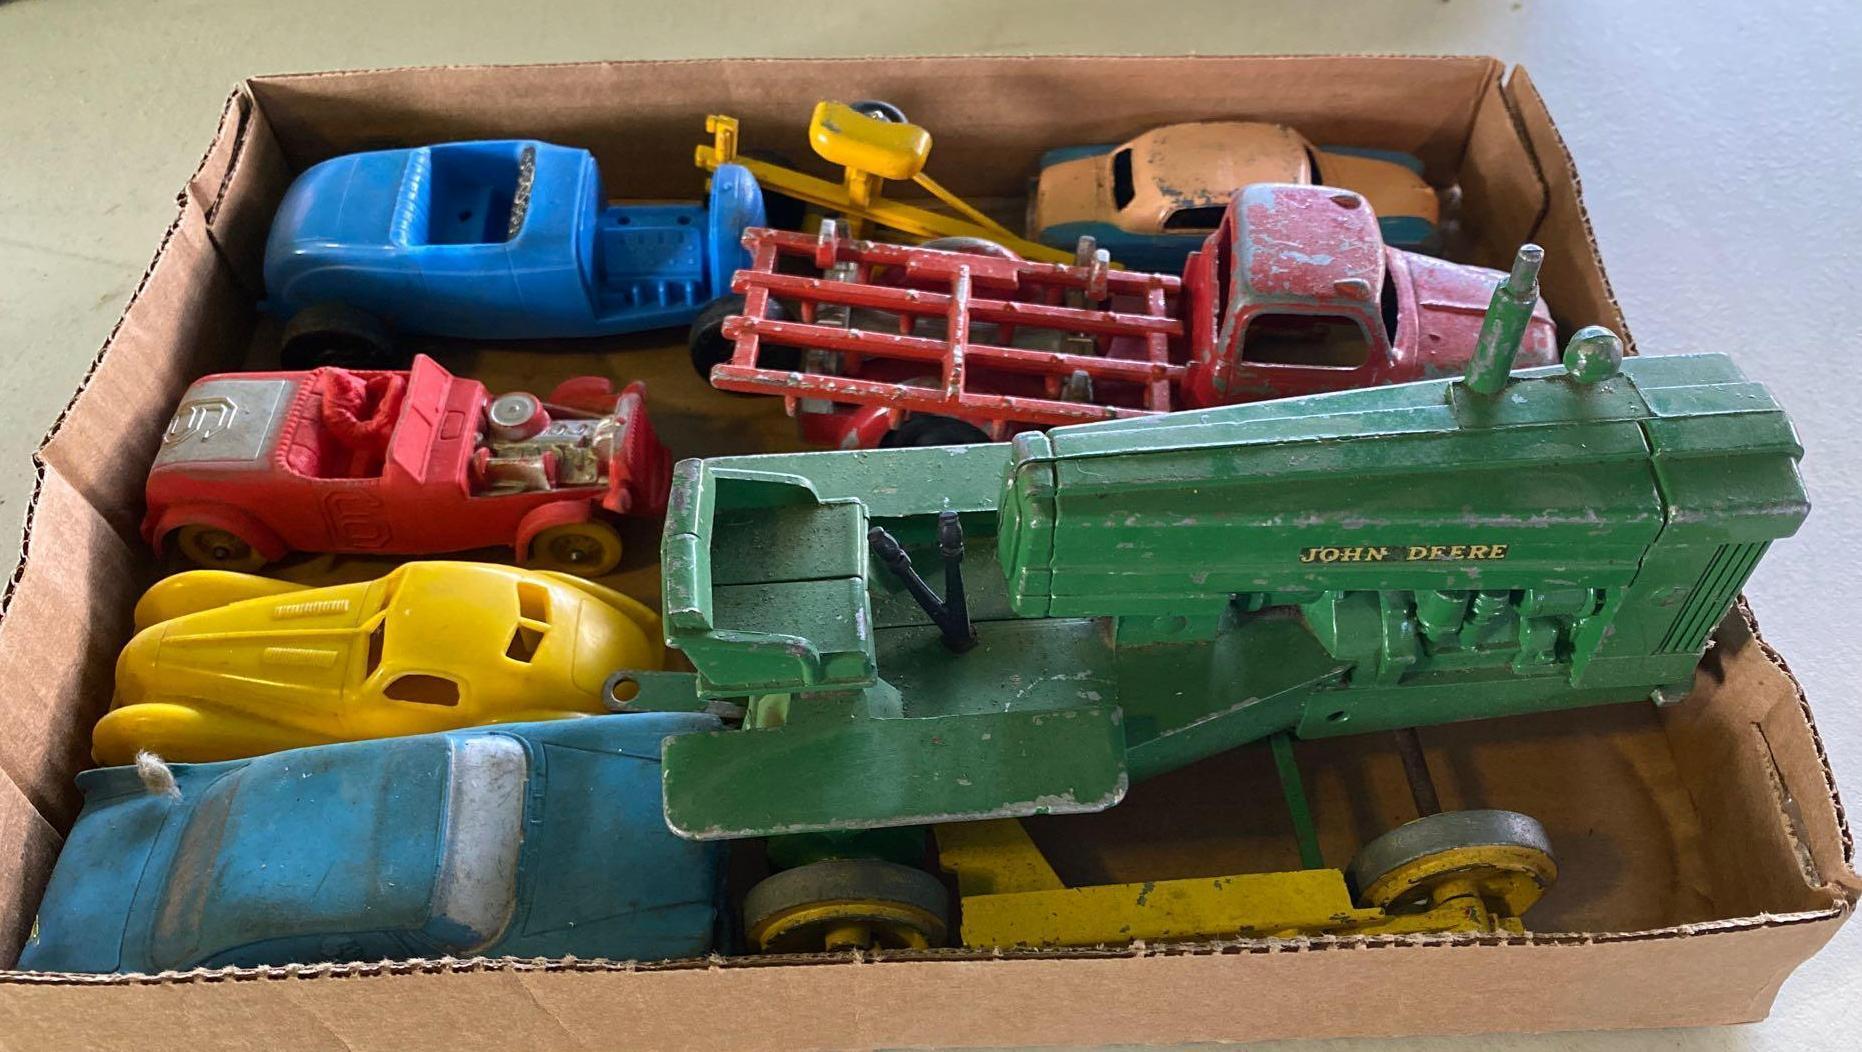 John Deere and other misc toys